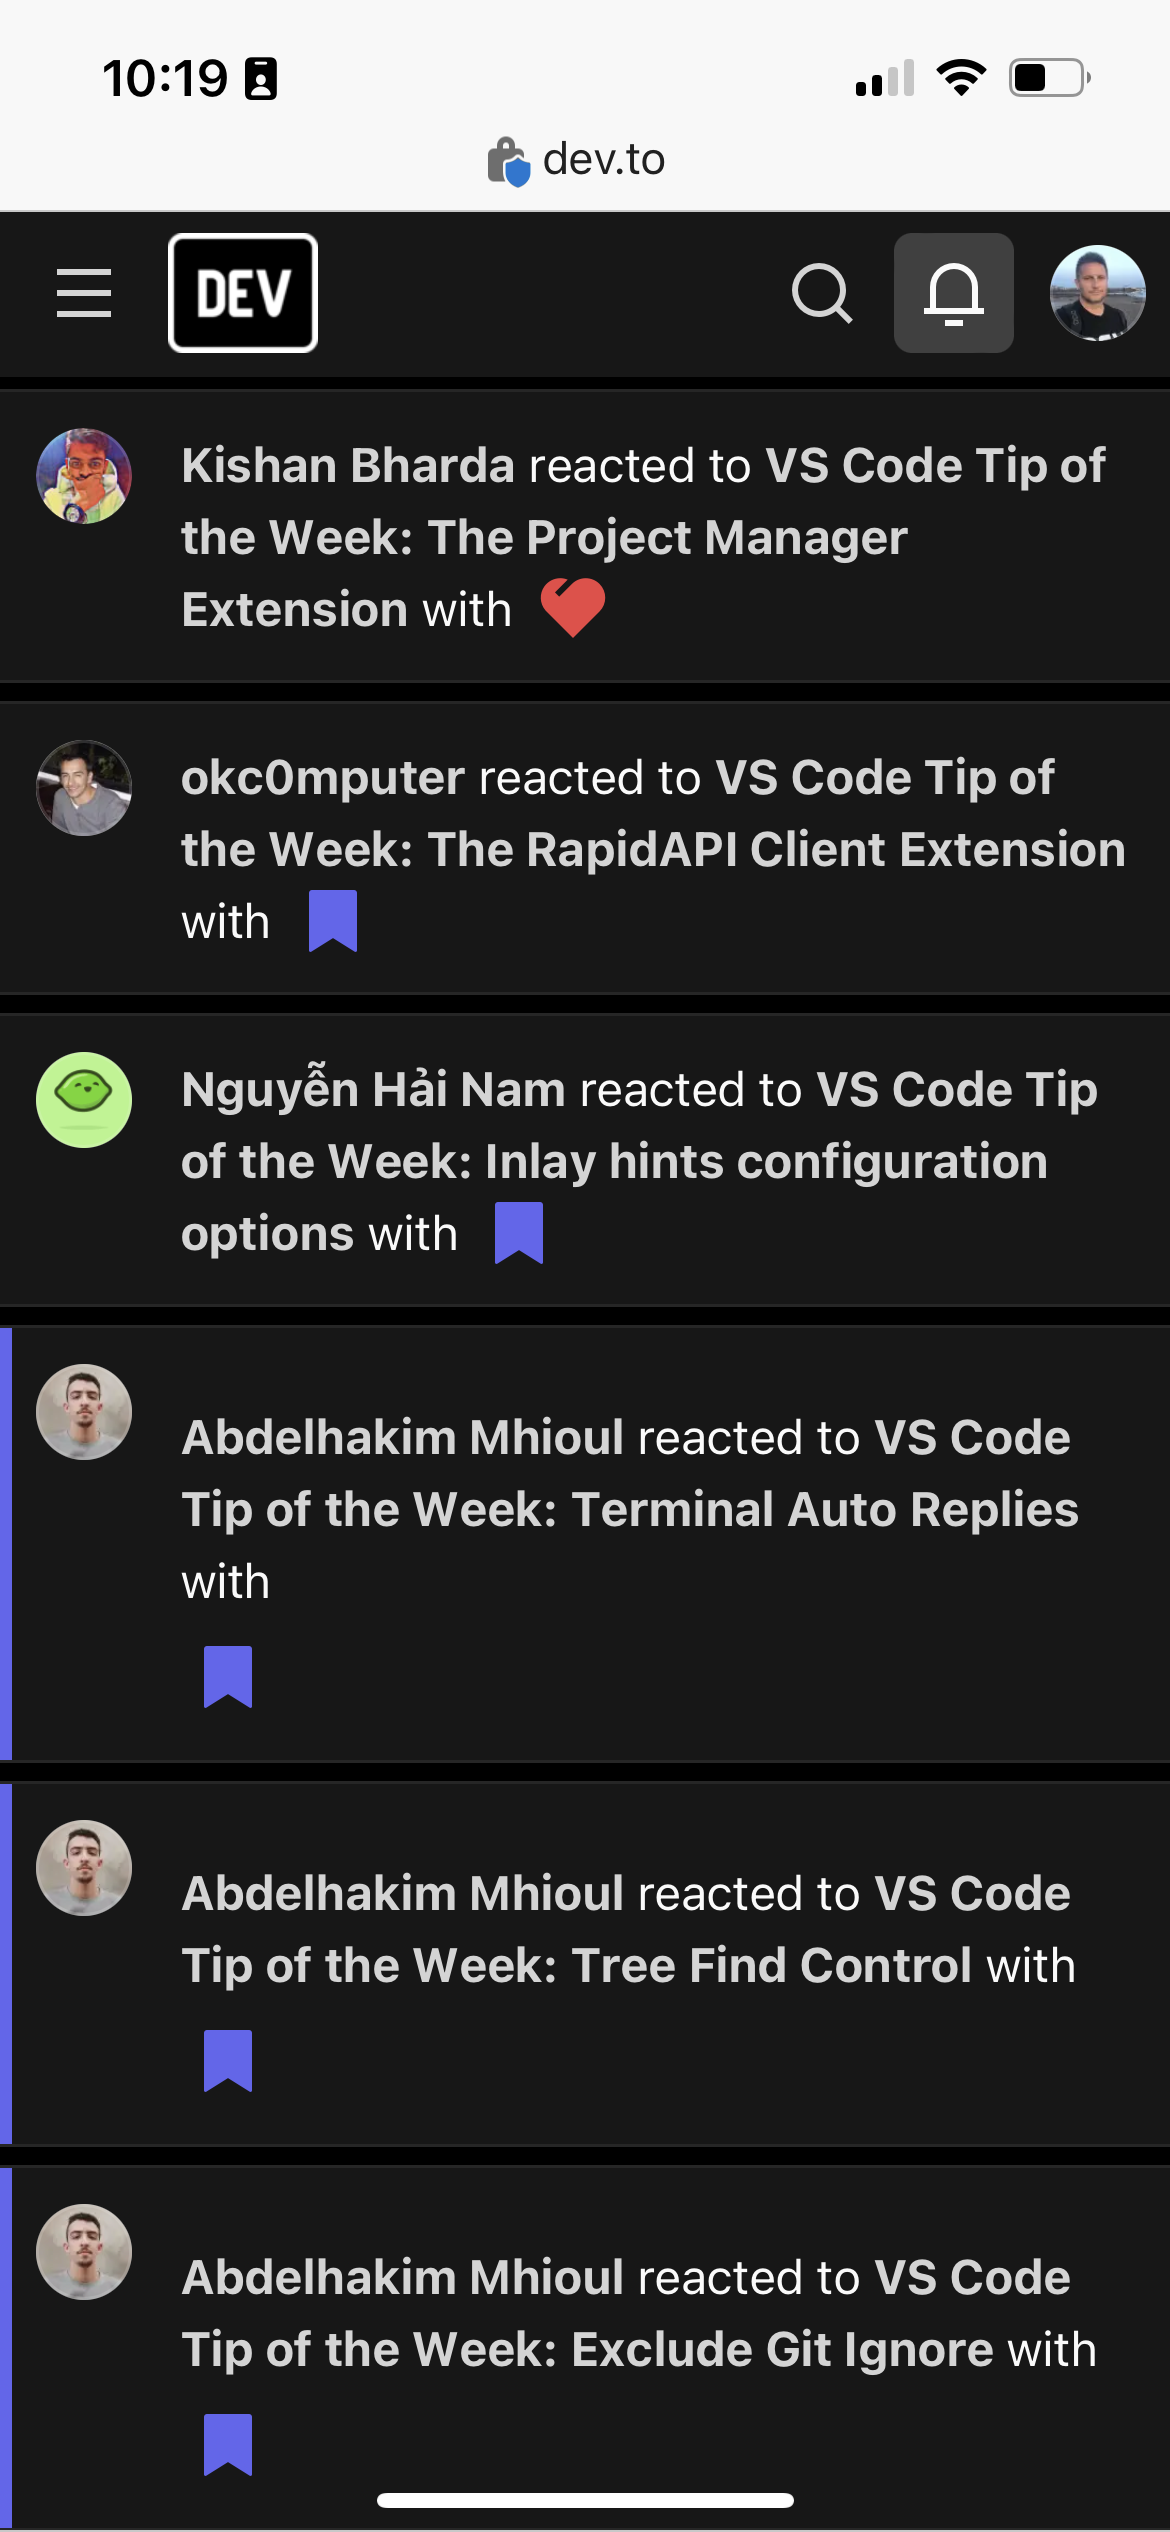 My dev.to notifications where people are bookmarking and liking previous posts from series of mine